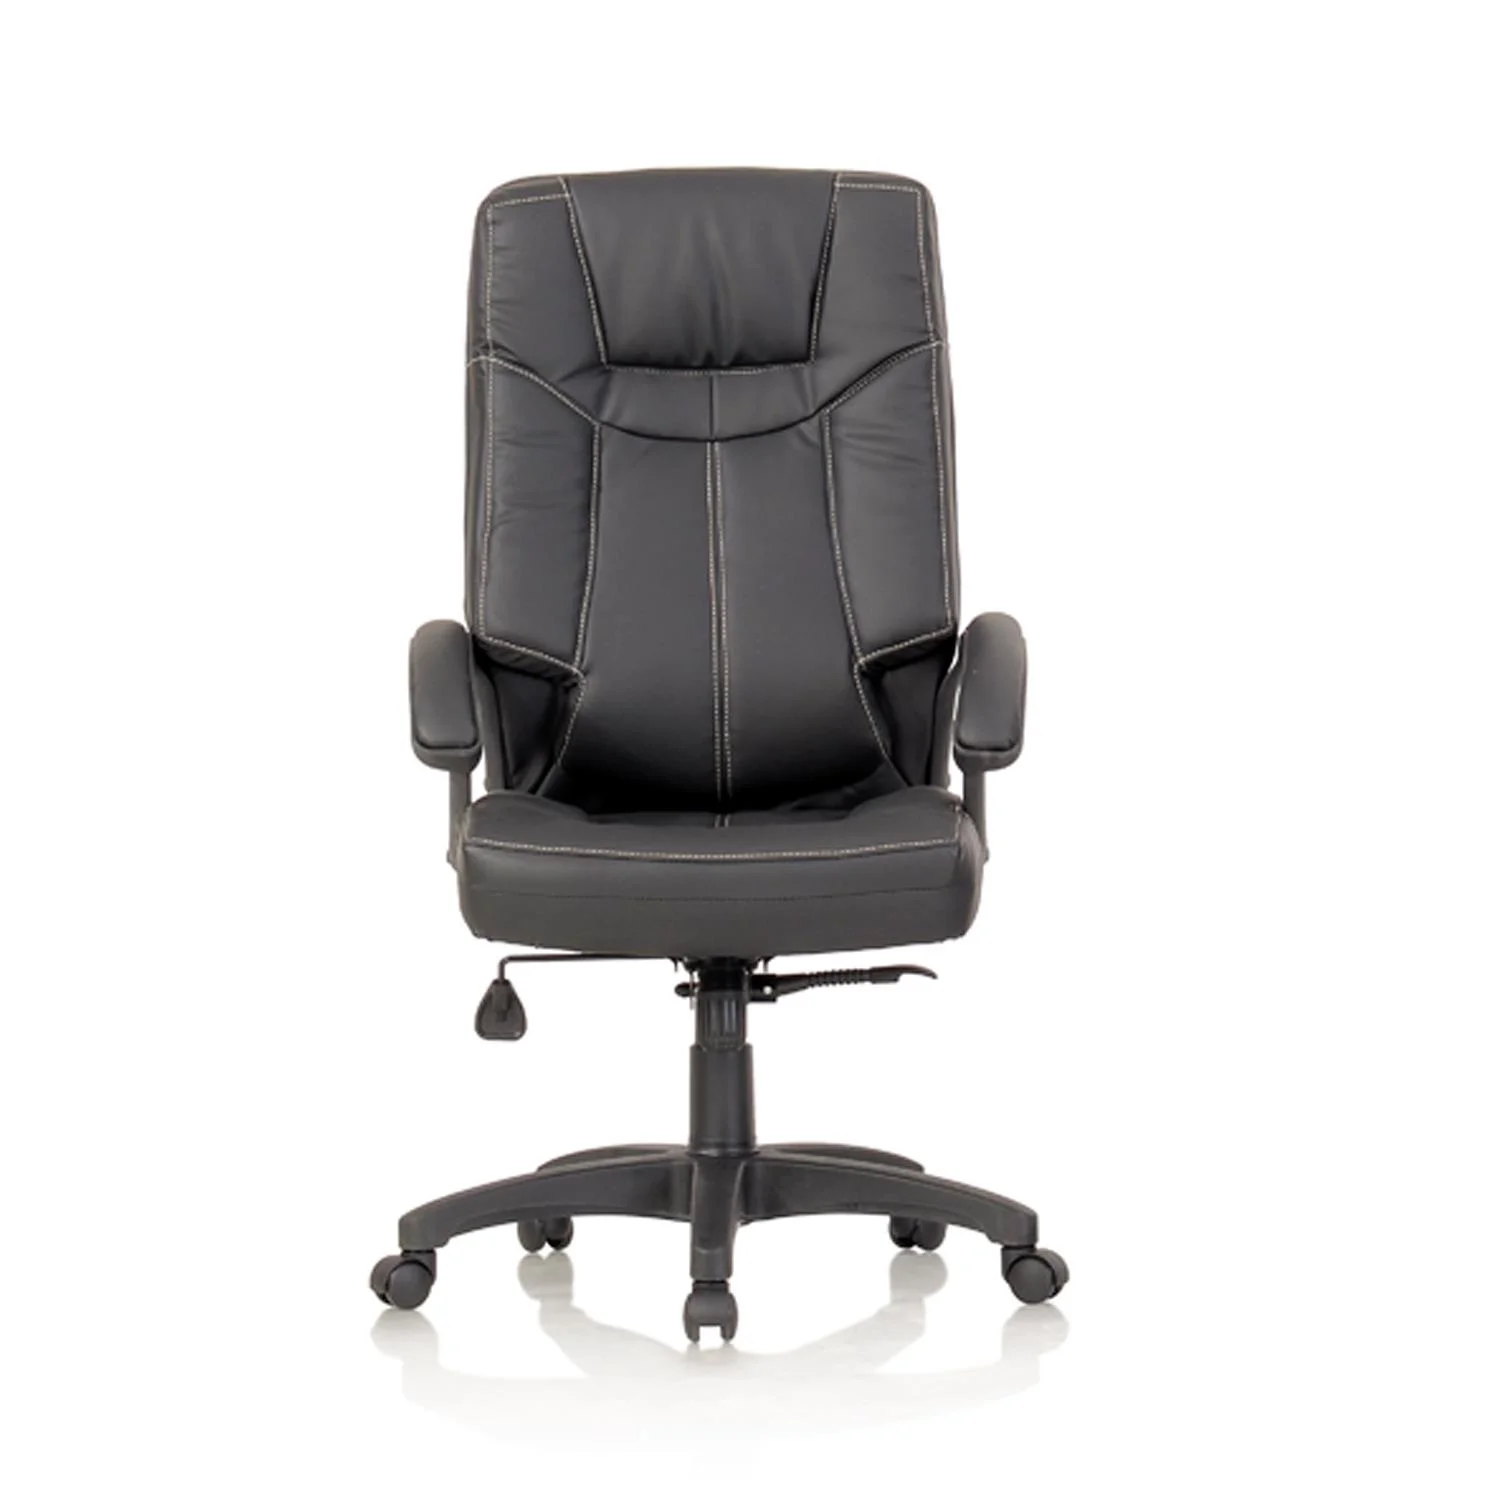 Tycoon HF 366 High Back Leather Chair